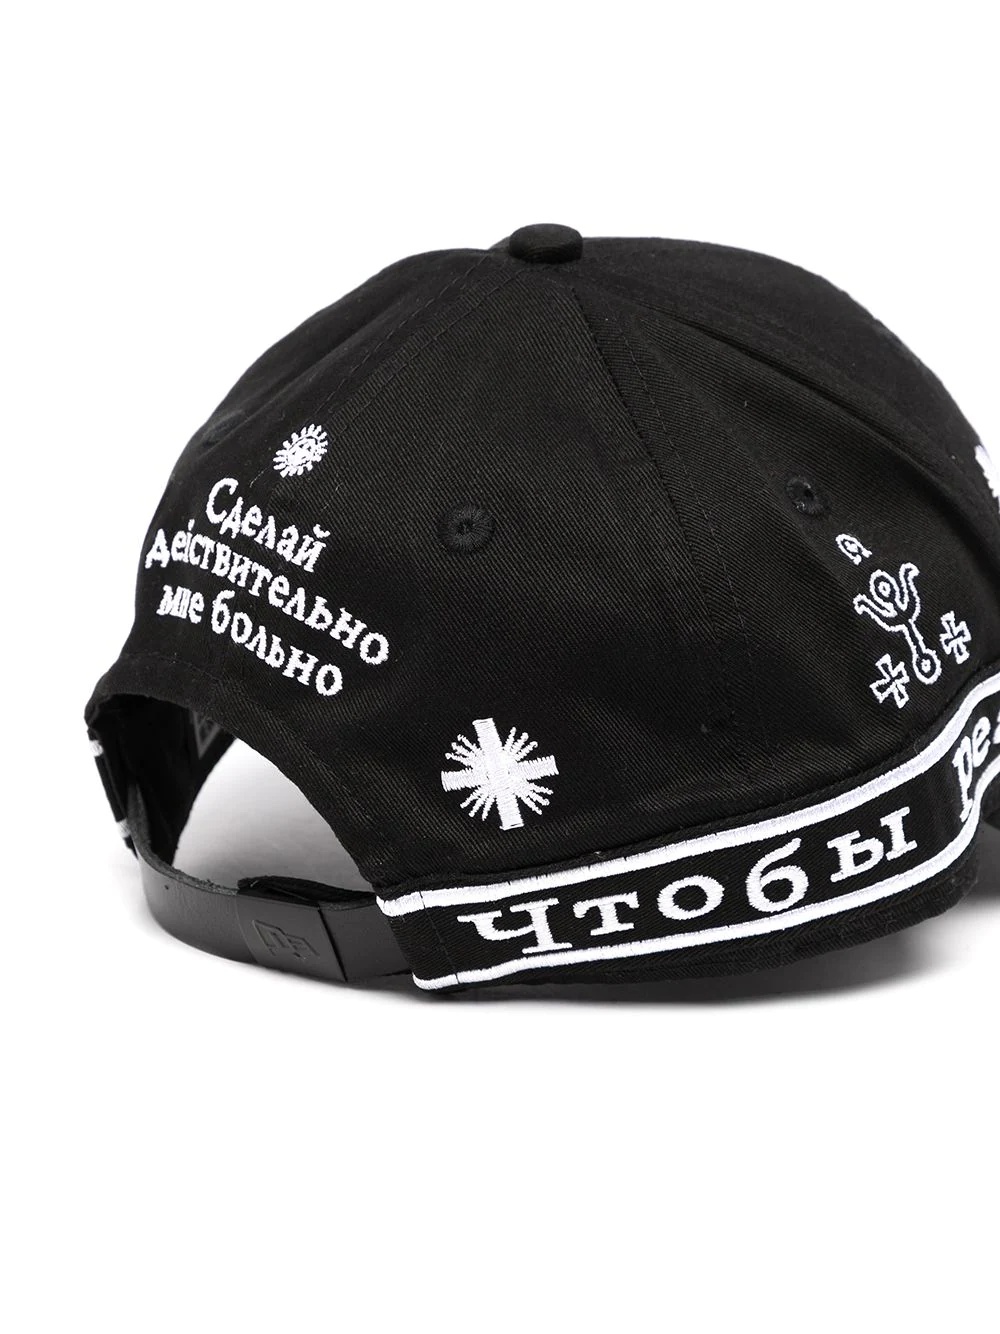 embroidered-logo cap - 2